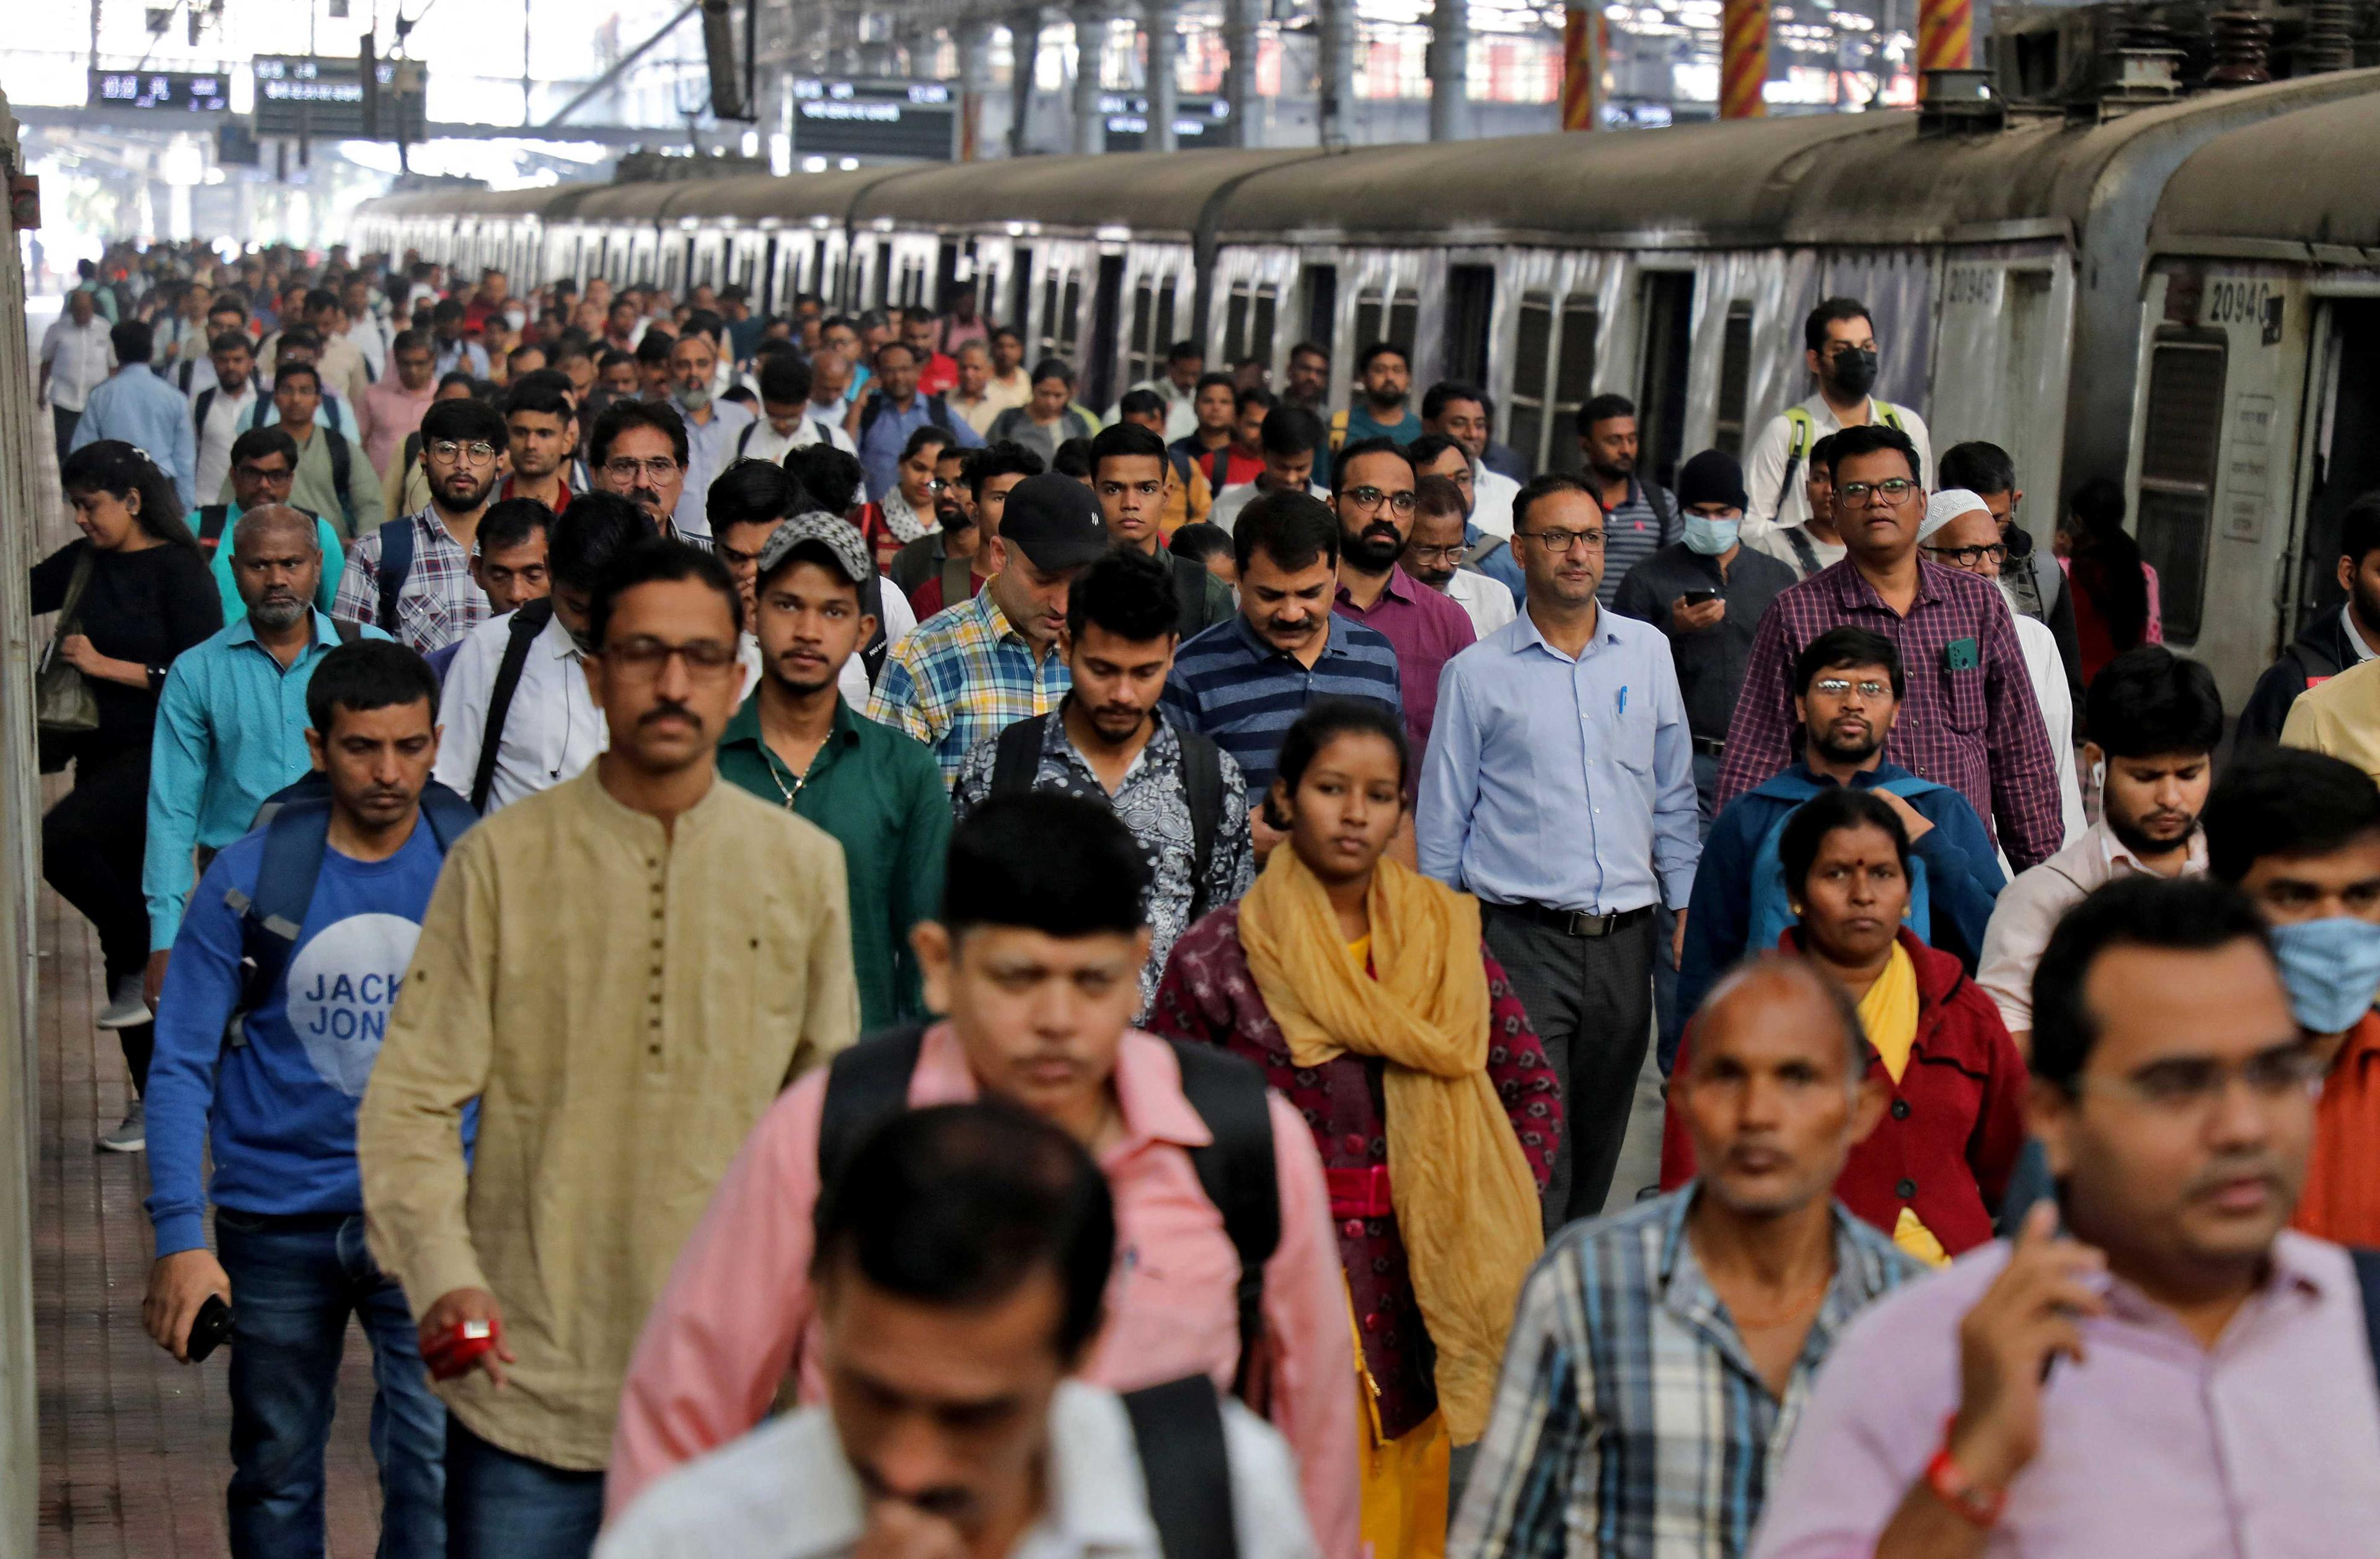 Commuters walk on a platform after disembarking from a suburban train at a railway station in Mumbai, India, Jan 21. Photo: Reuters